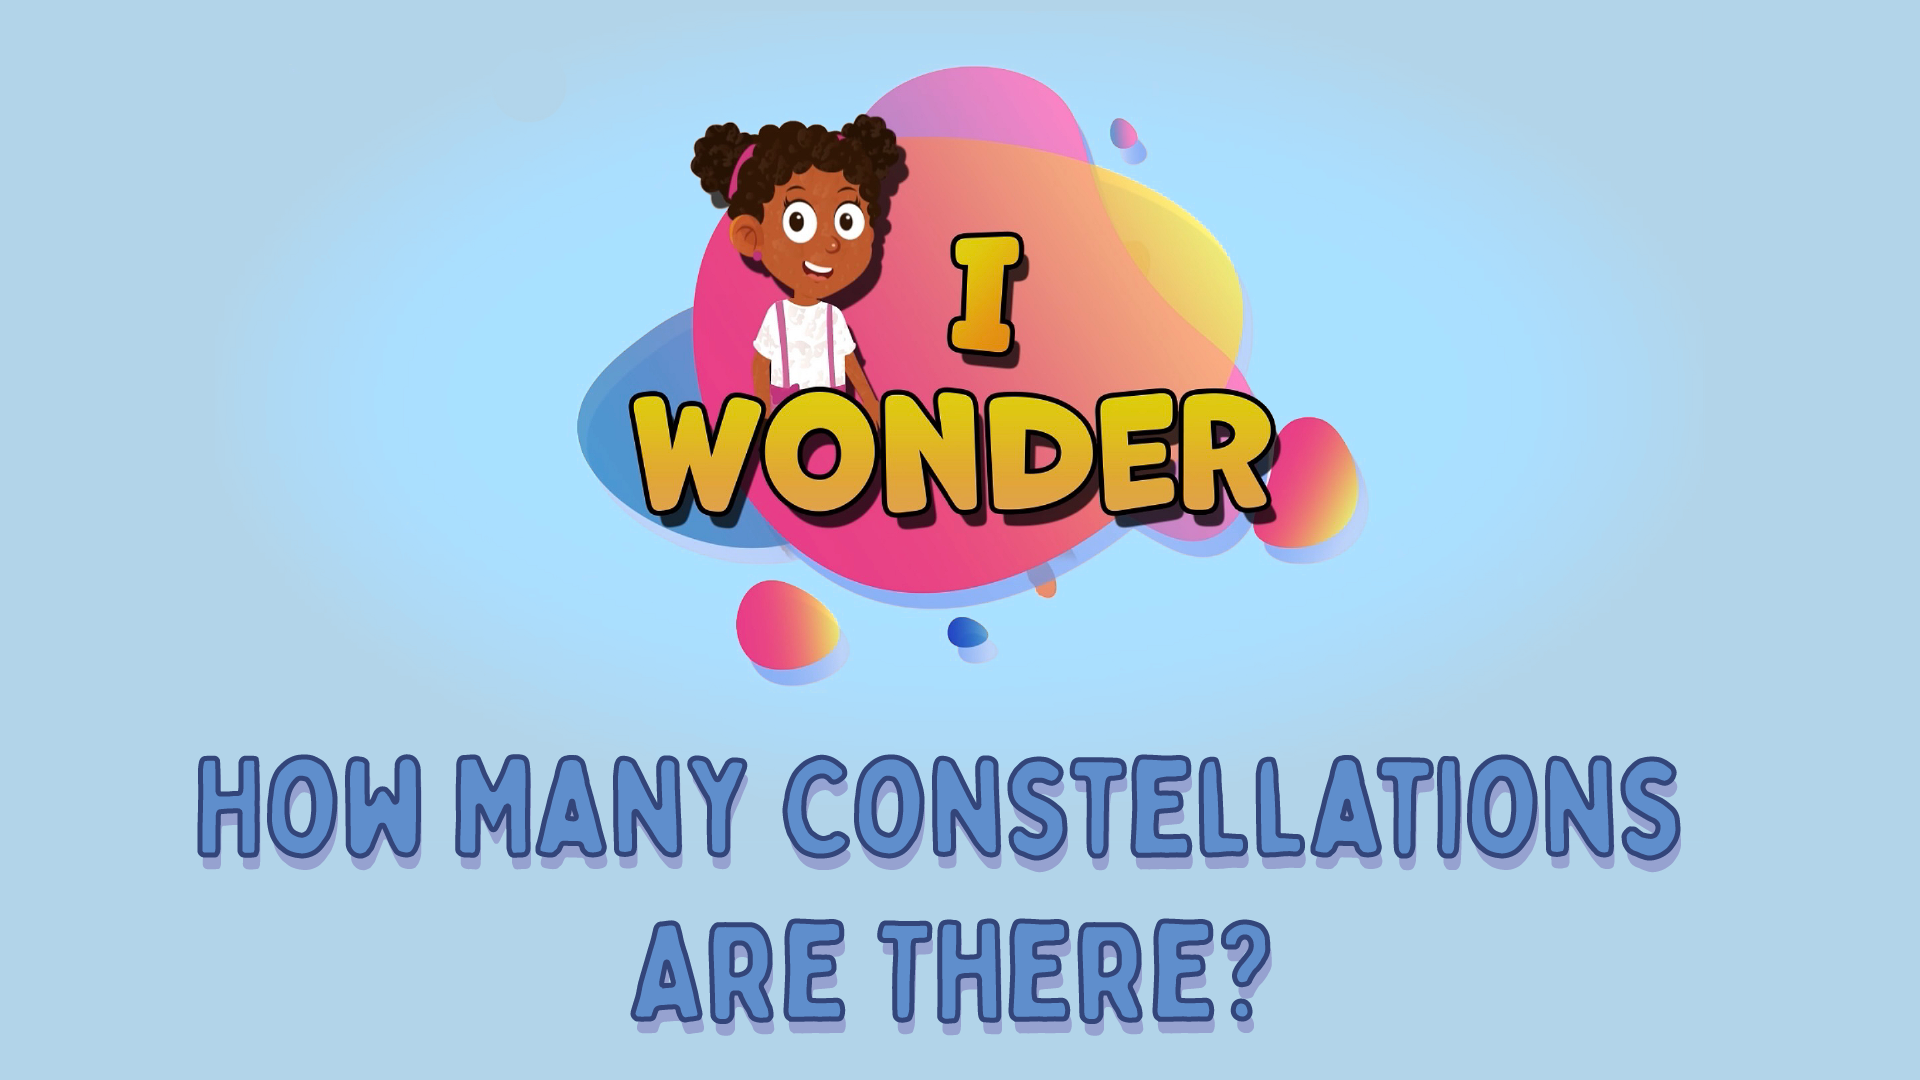 How Many Constellations Are There?